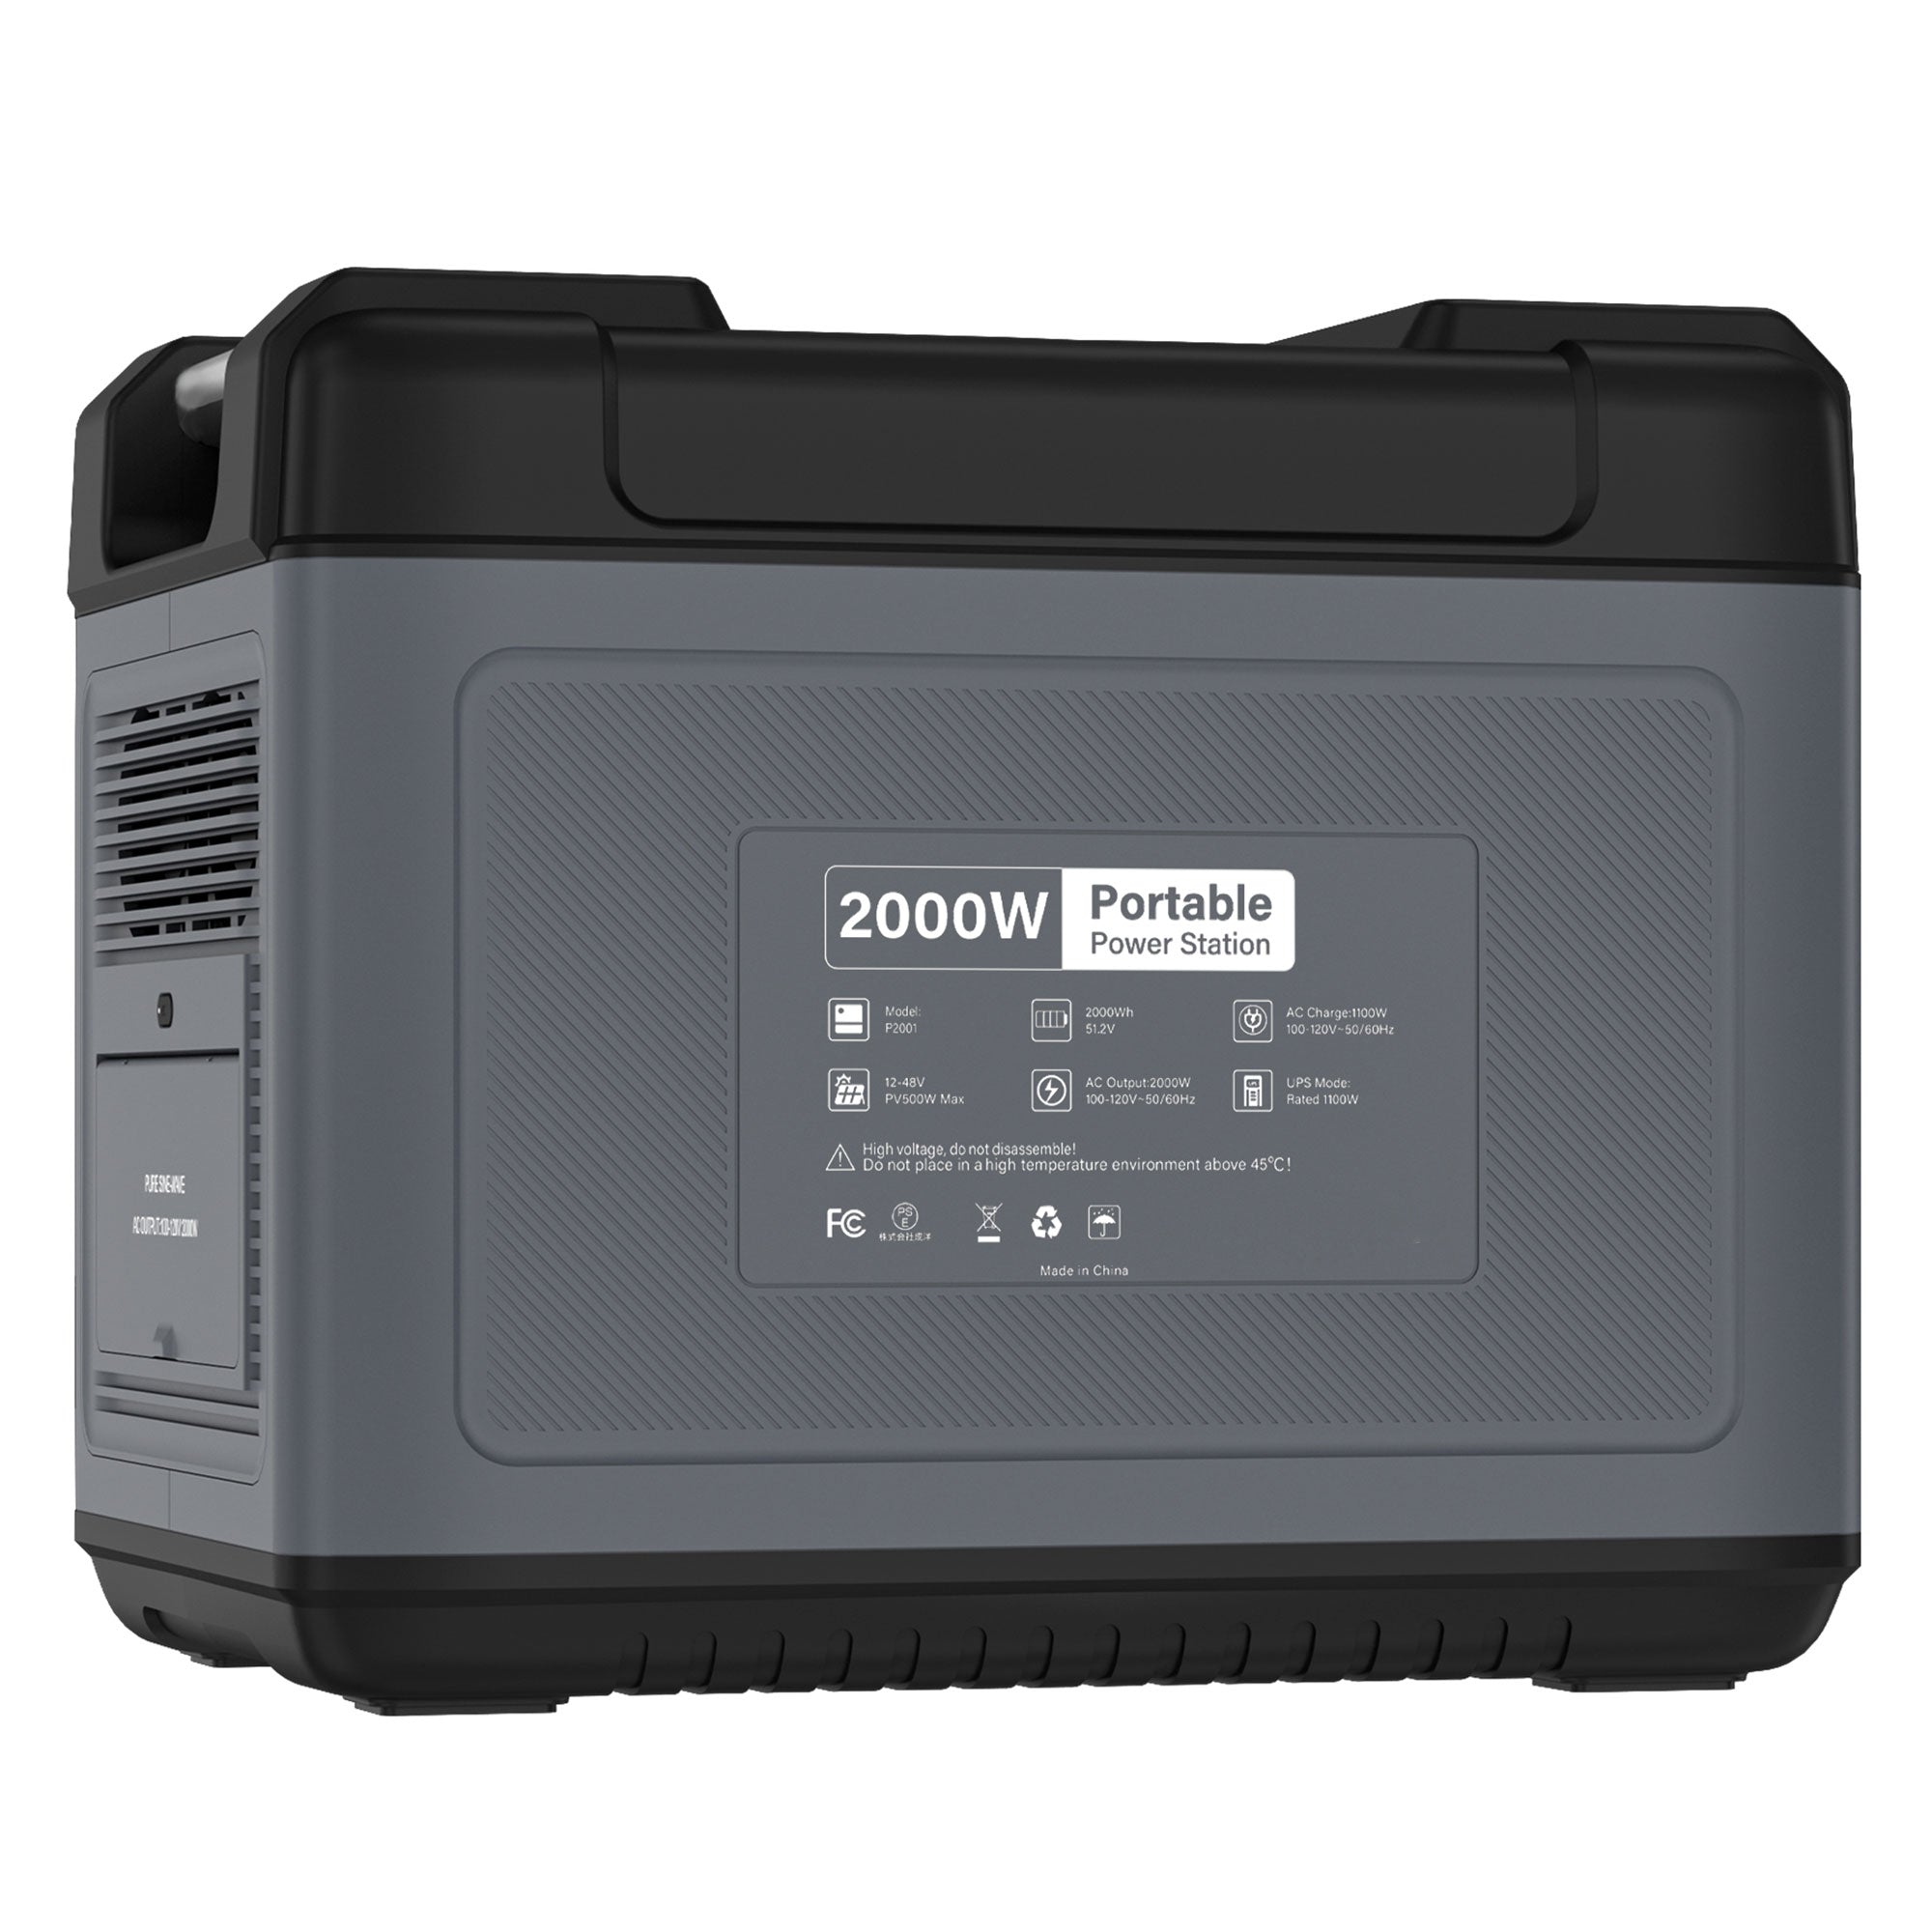 ACOPOWER P2001 Portable Power Station 2000W/2000Wh